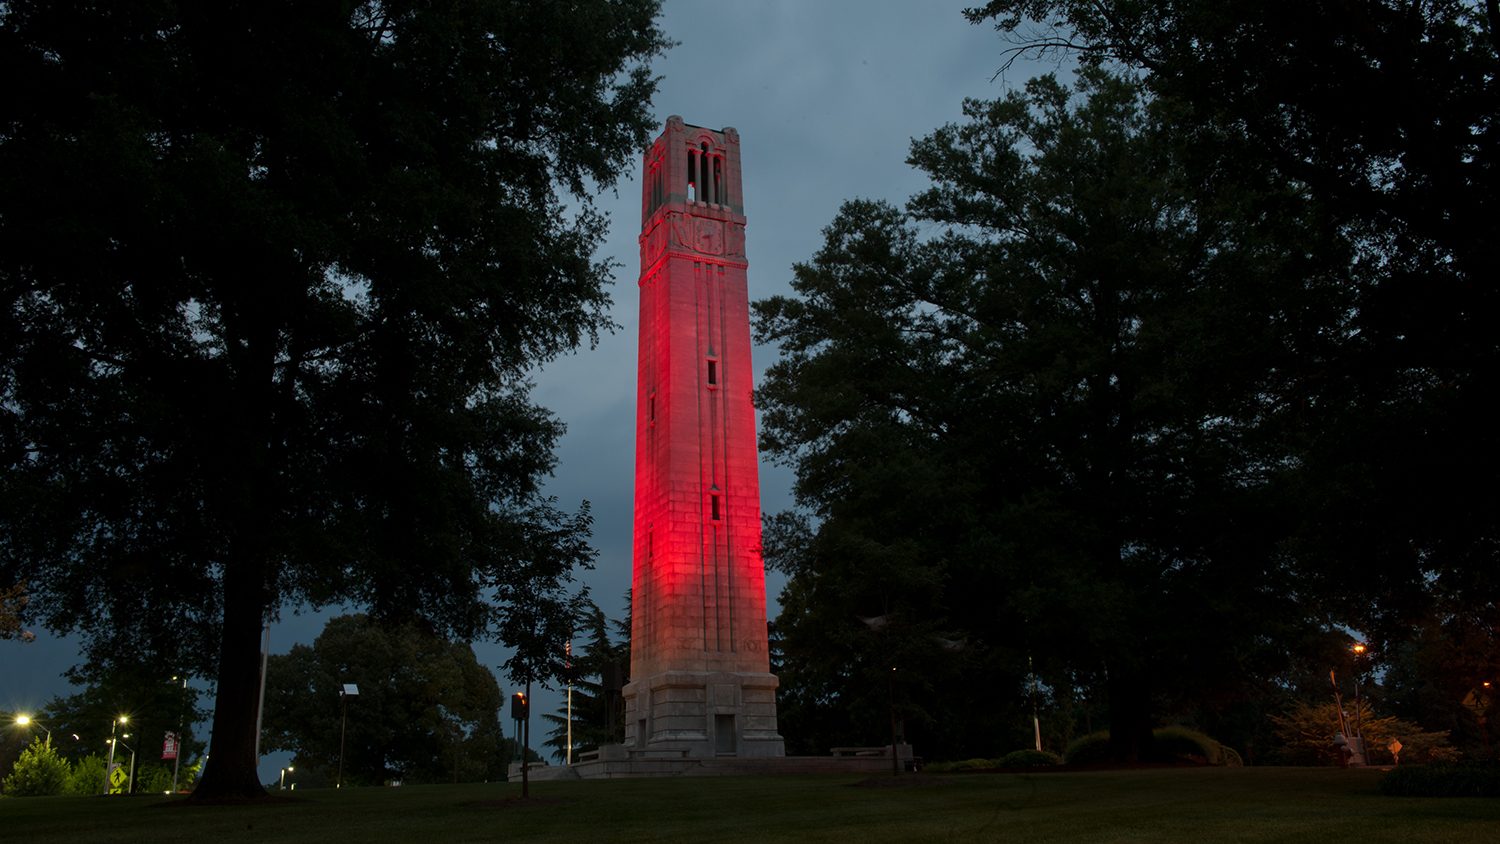 The red belltower looms over campus.